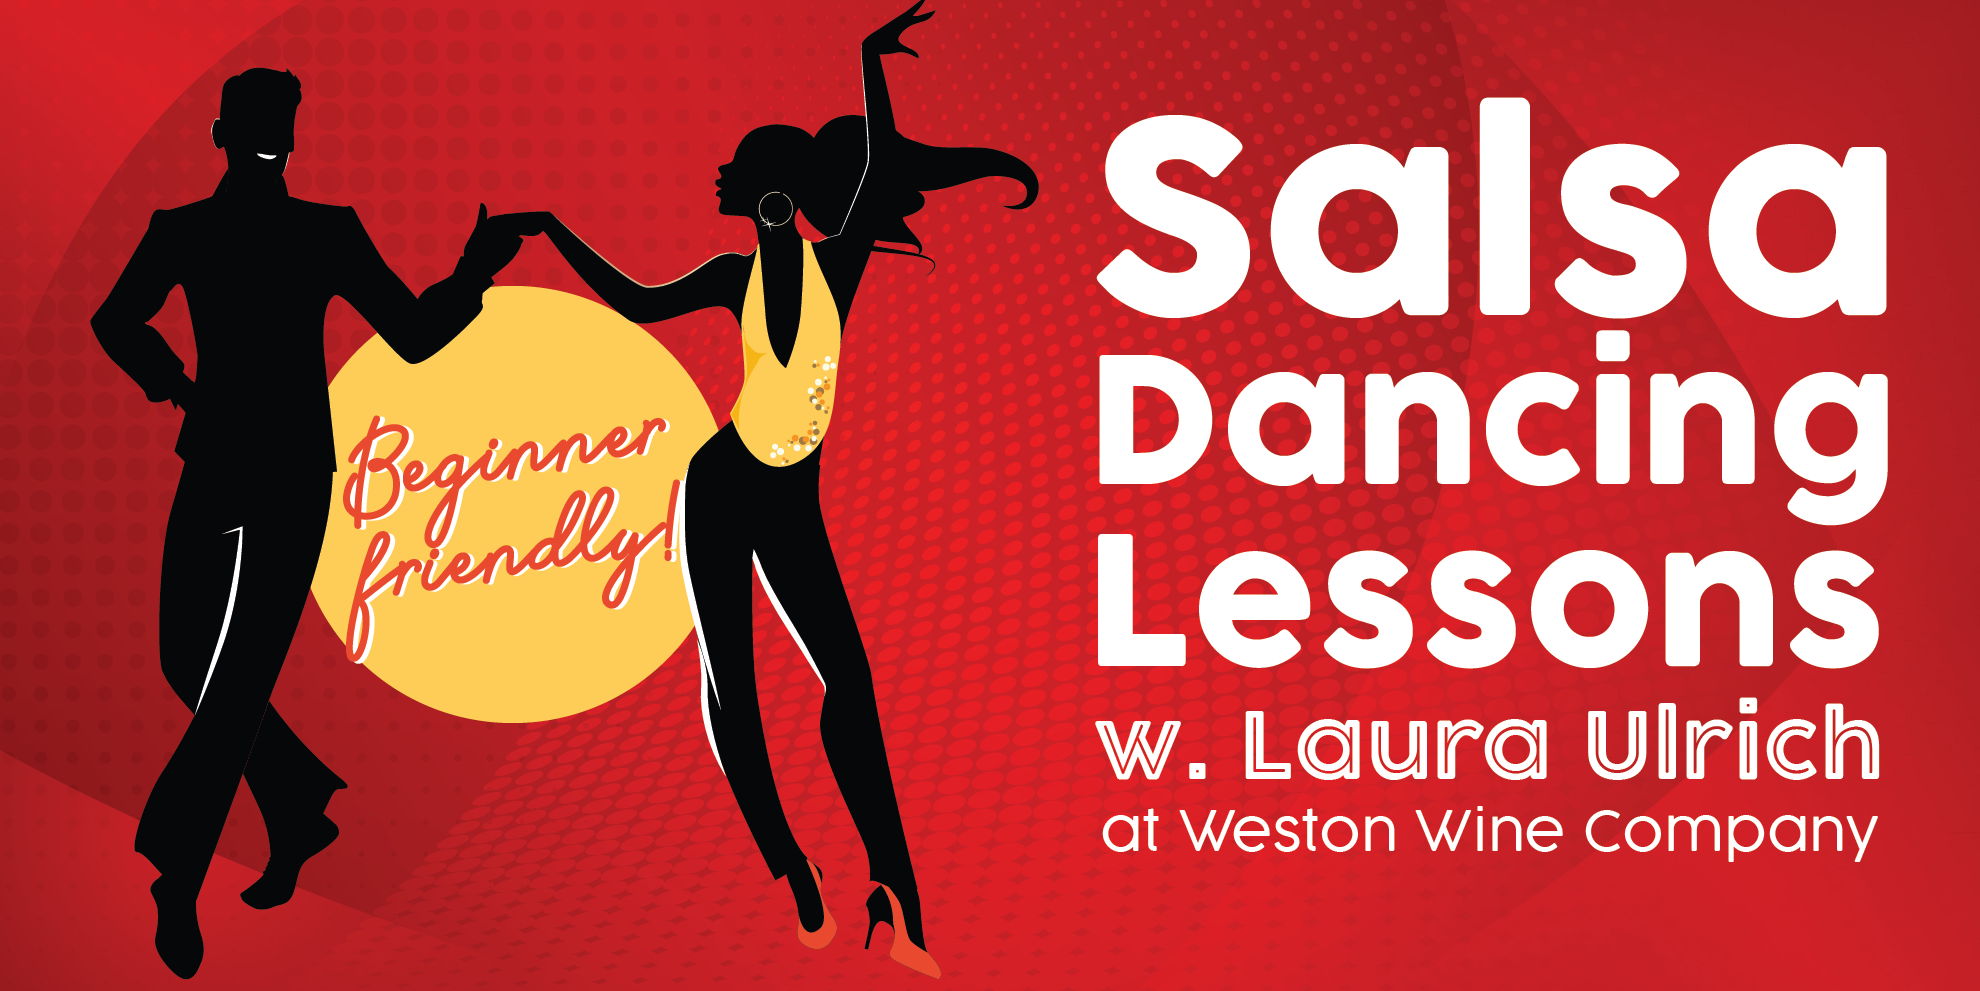 Salsa Dancing Lessons! promotional image